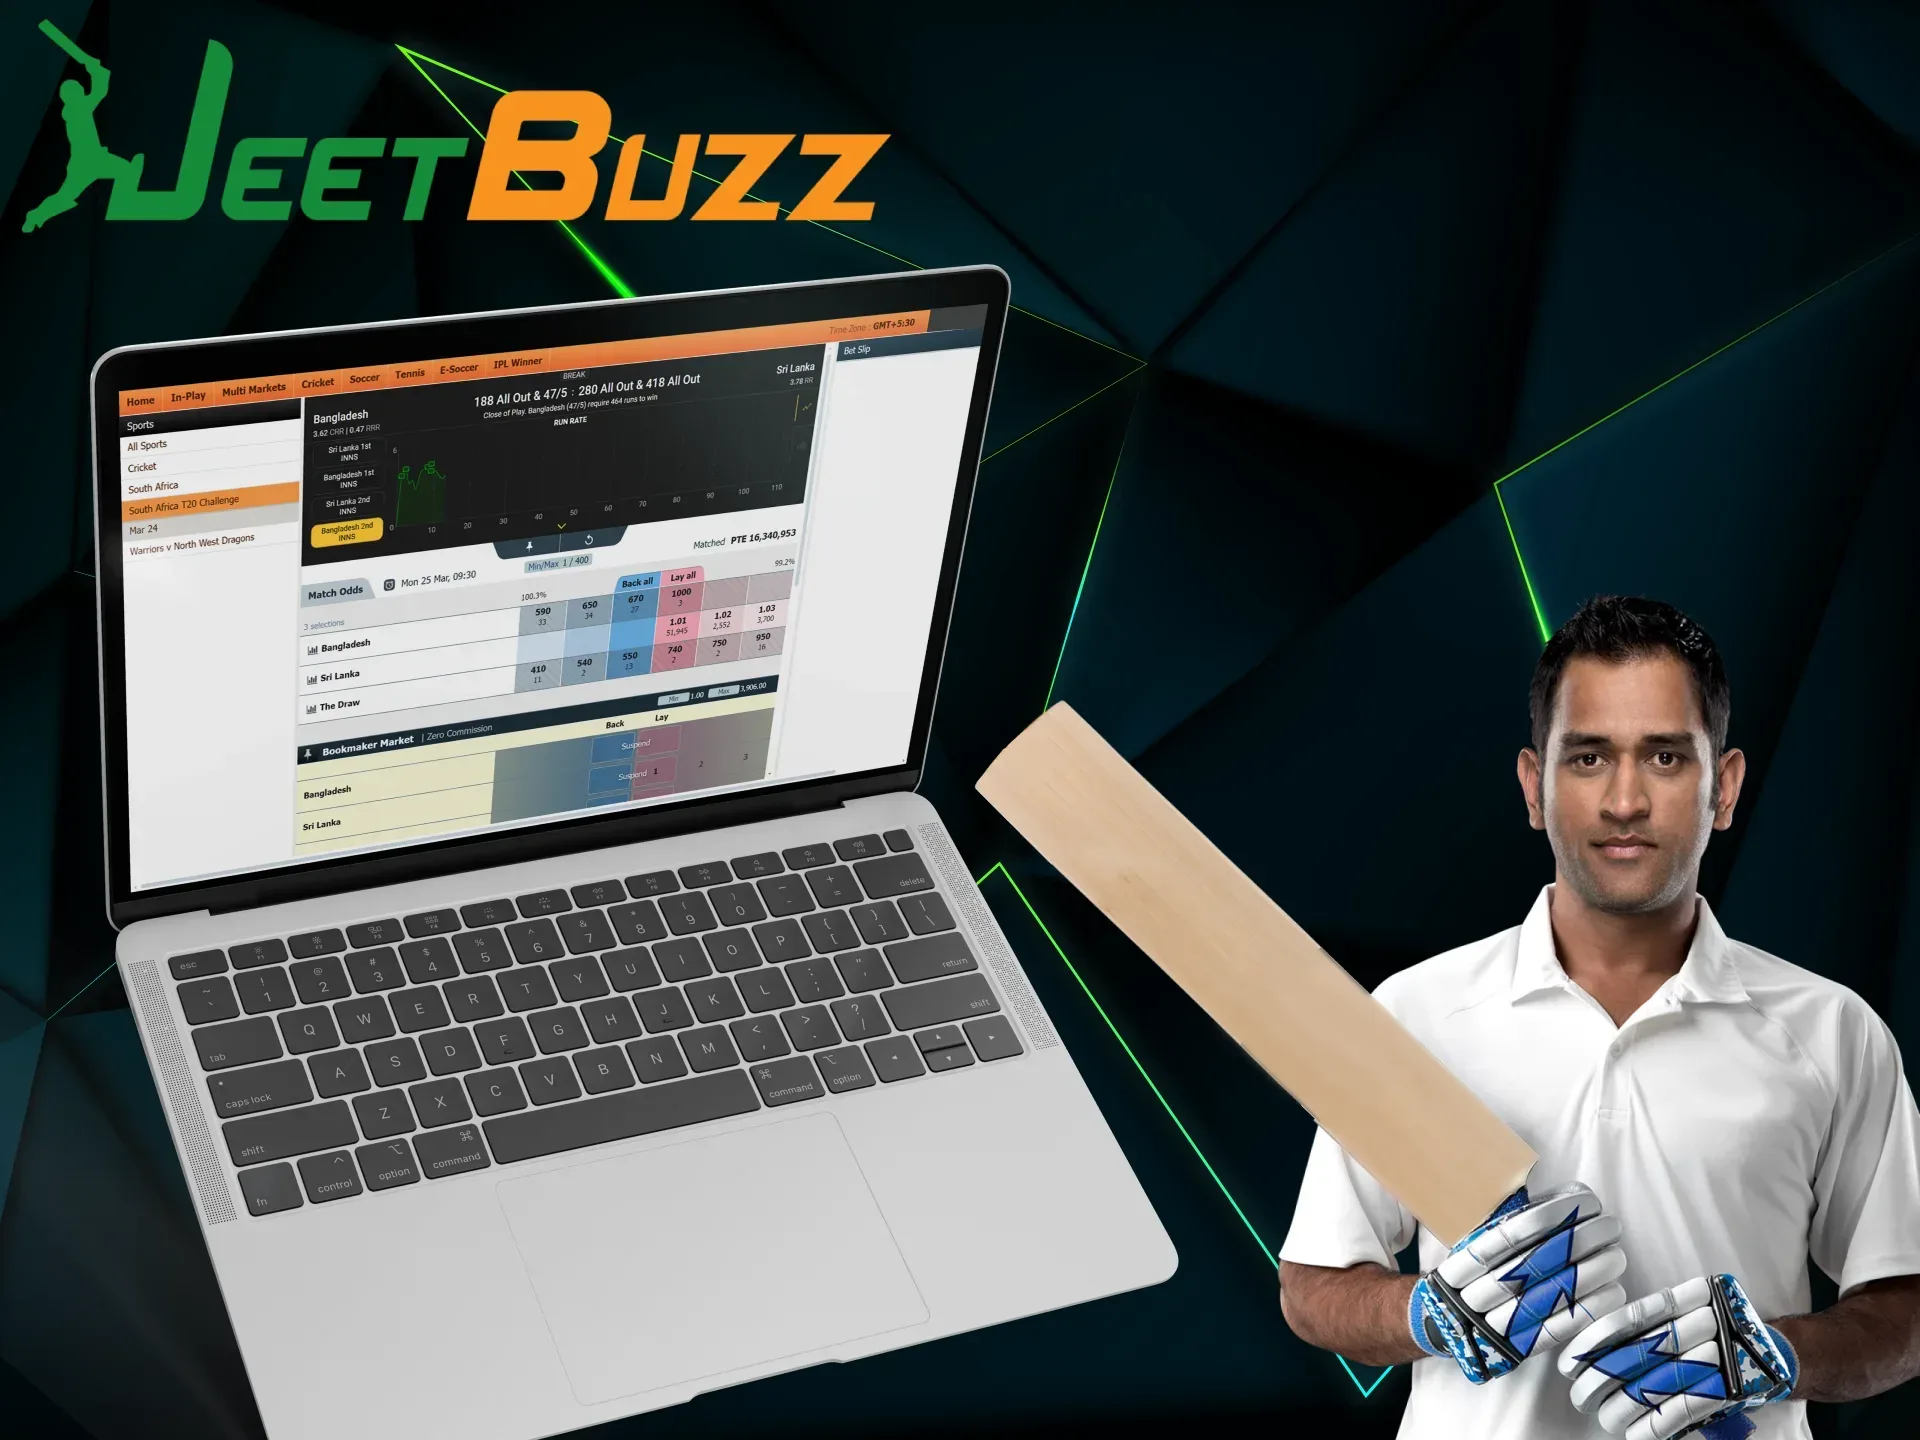 There are many different cricket betting options at JeetBuzz.